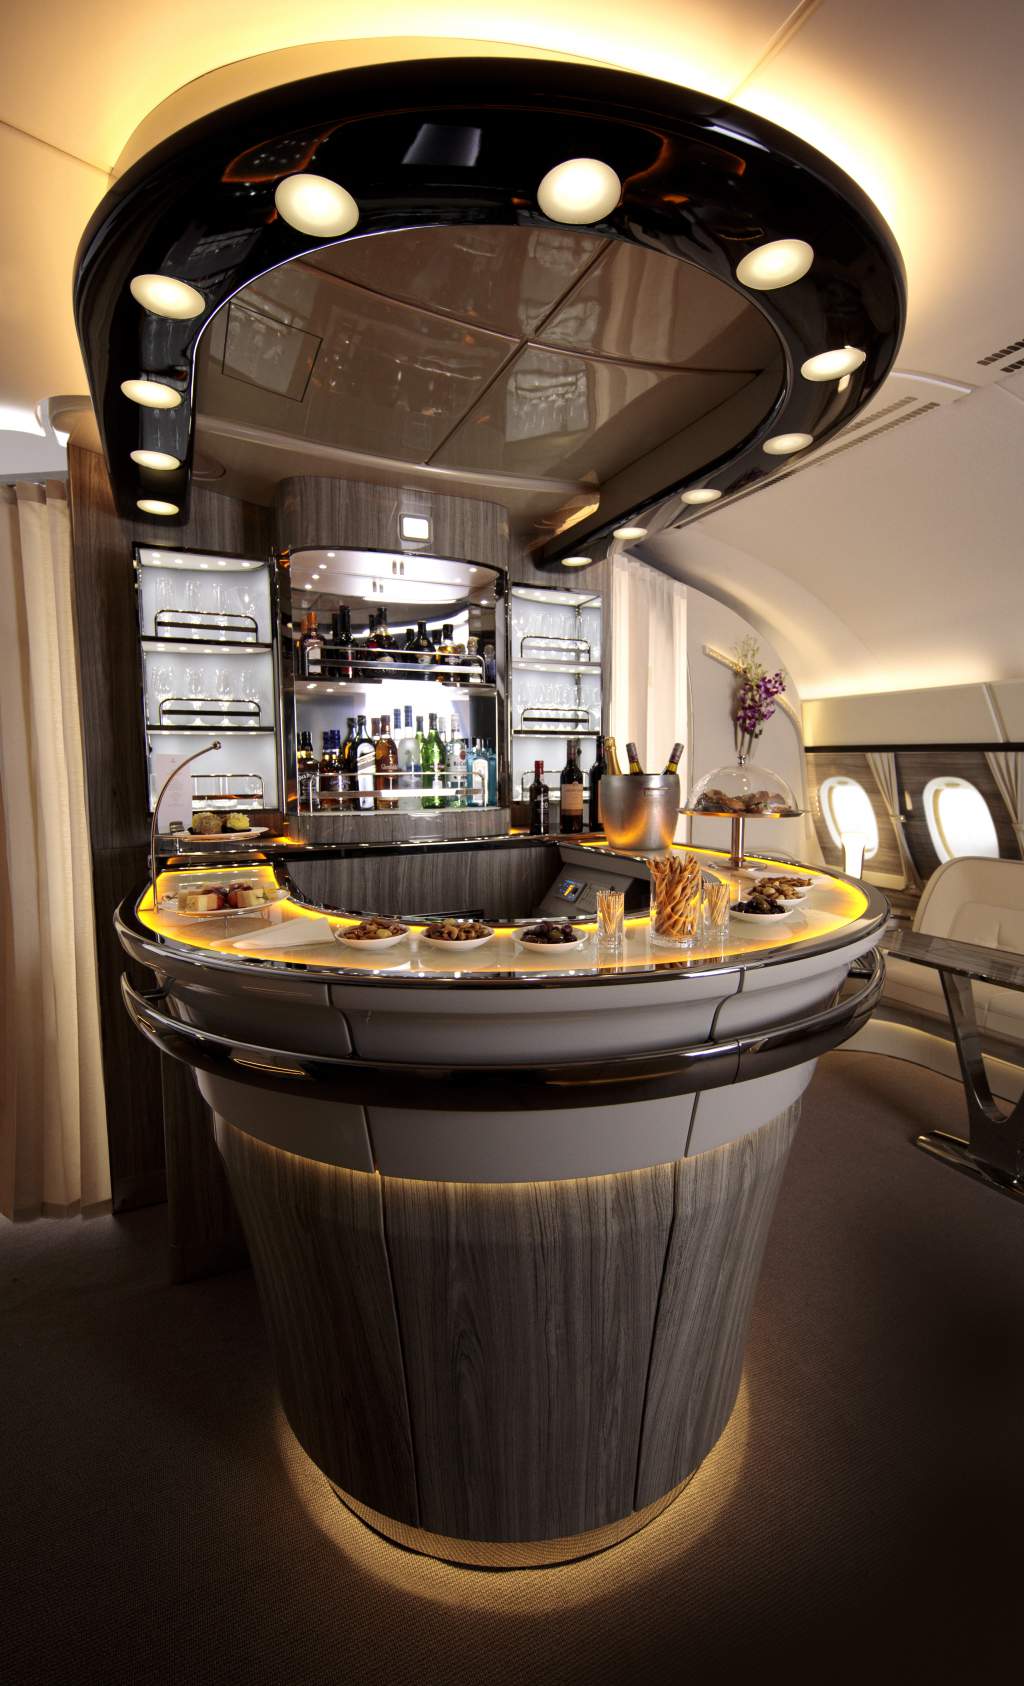 Emirates-A380-Onboard-Lounge4__1487859154_165.225.34.105